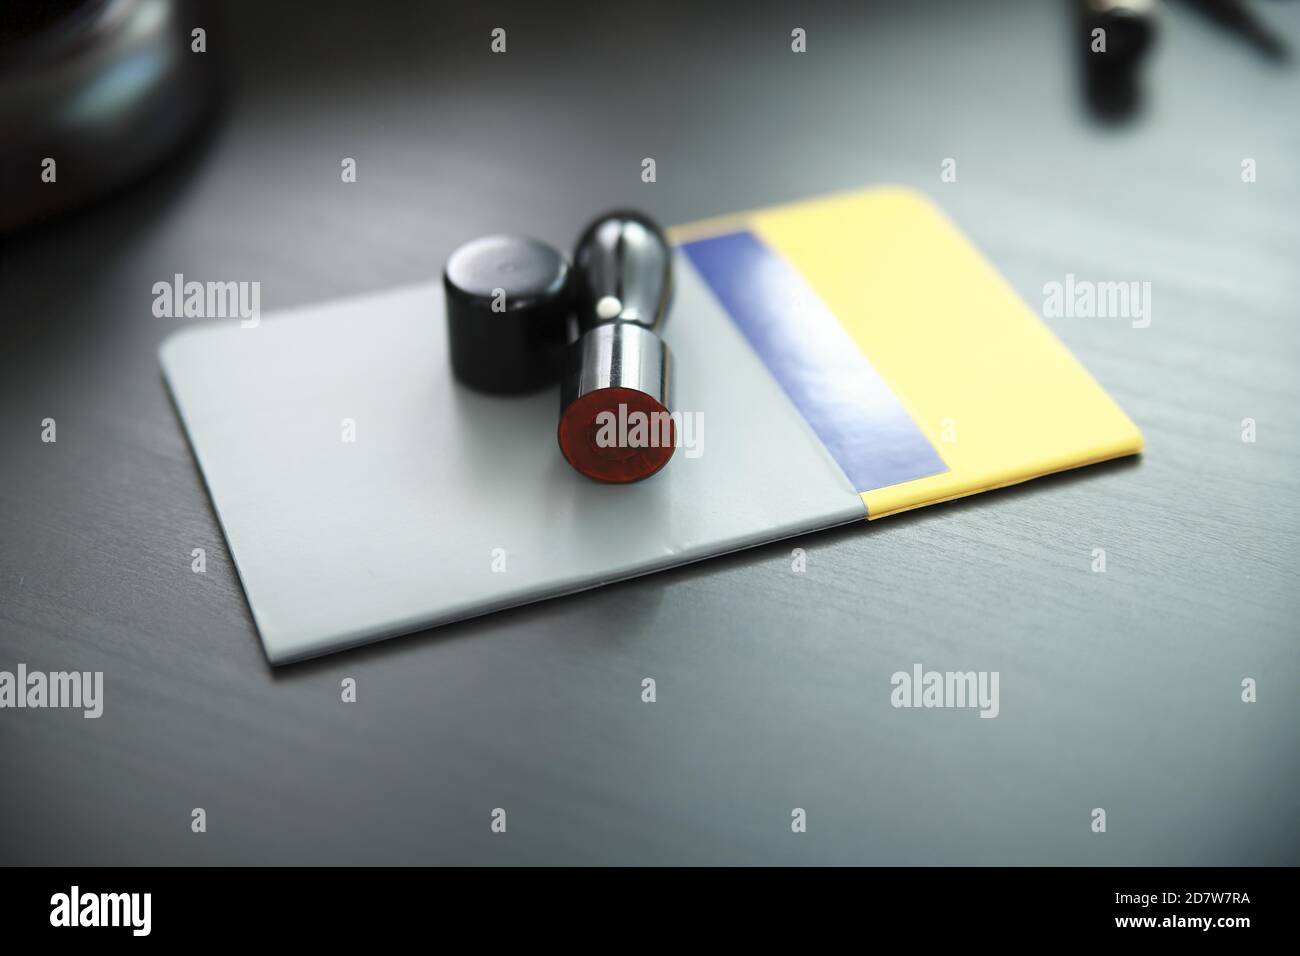 Bank book with stamp on desk Stock Photo